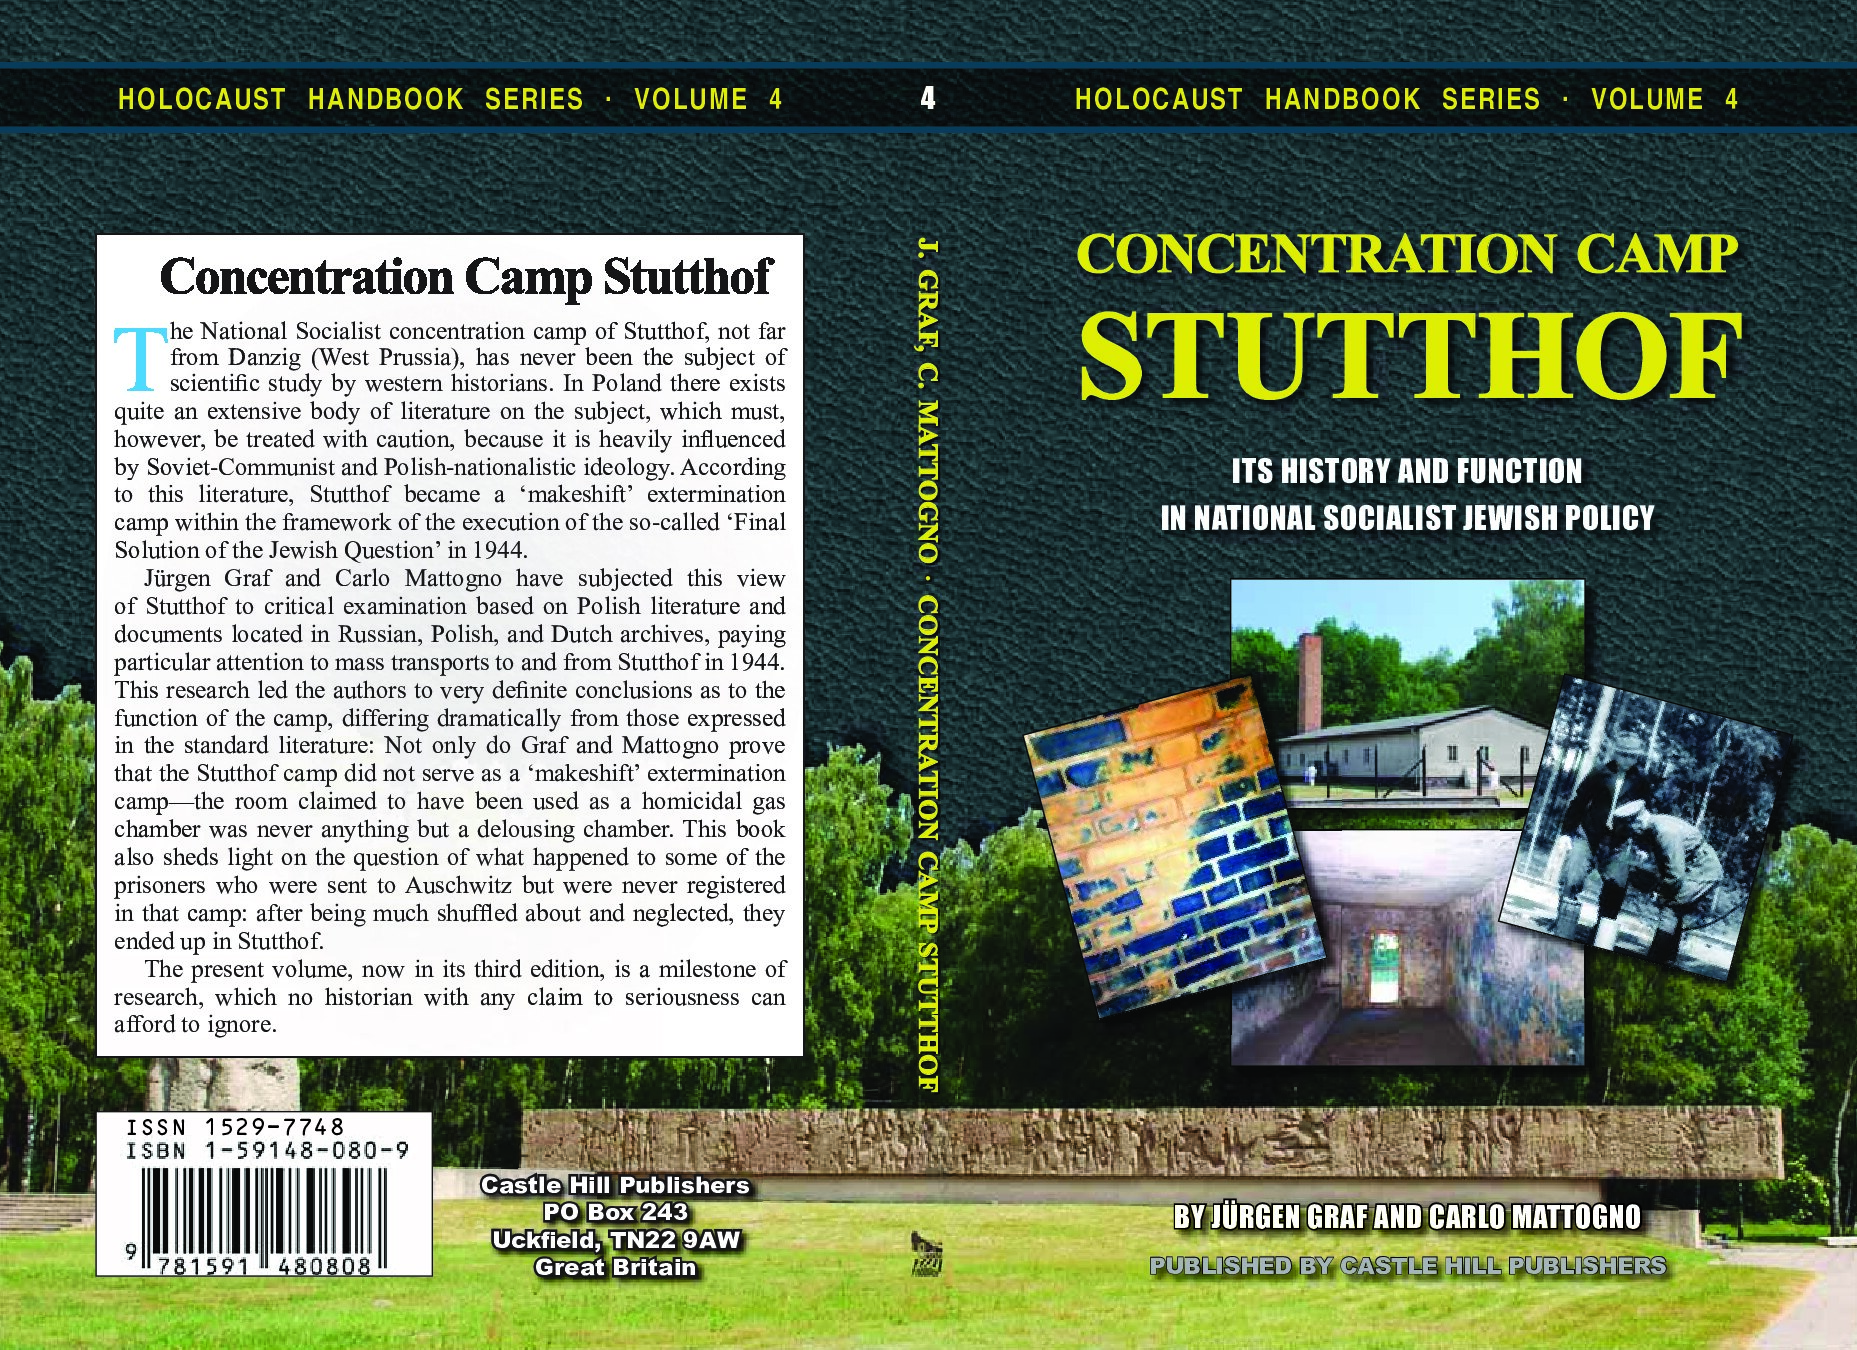 4 - Graf & Mattogno; Concentration Camp Stutthof - Its History and Function In National Socialist Jewish Policy